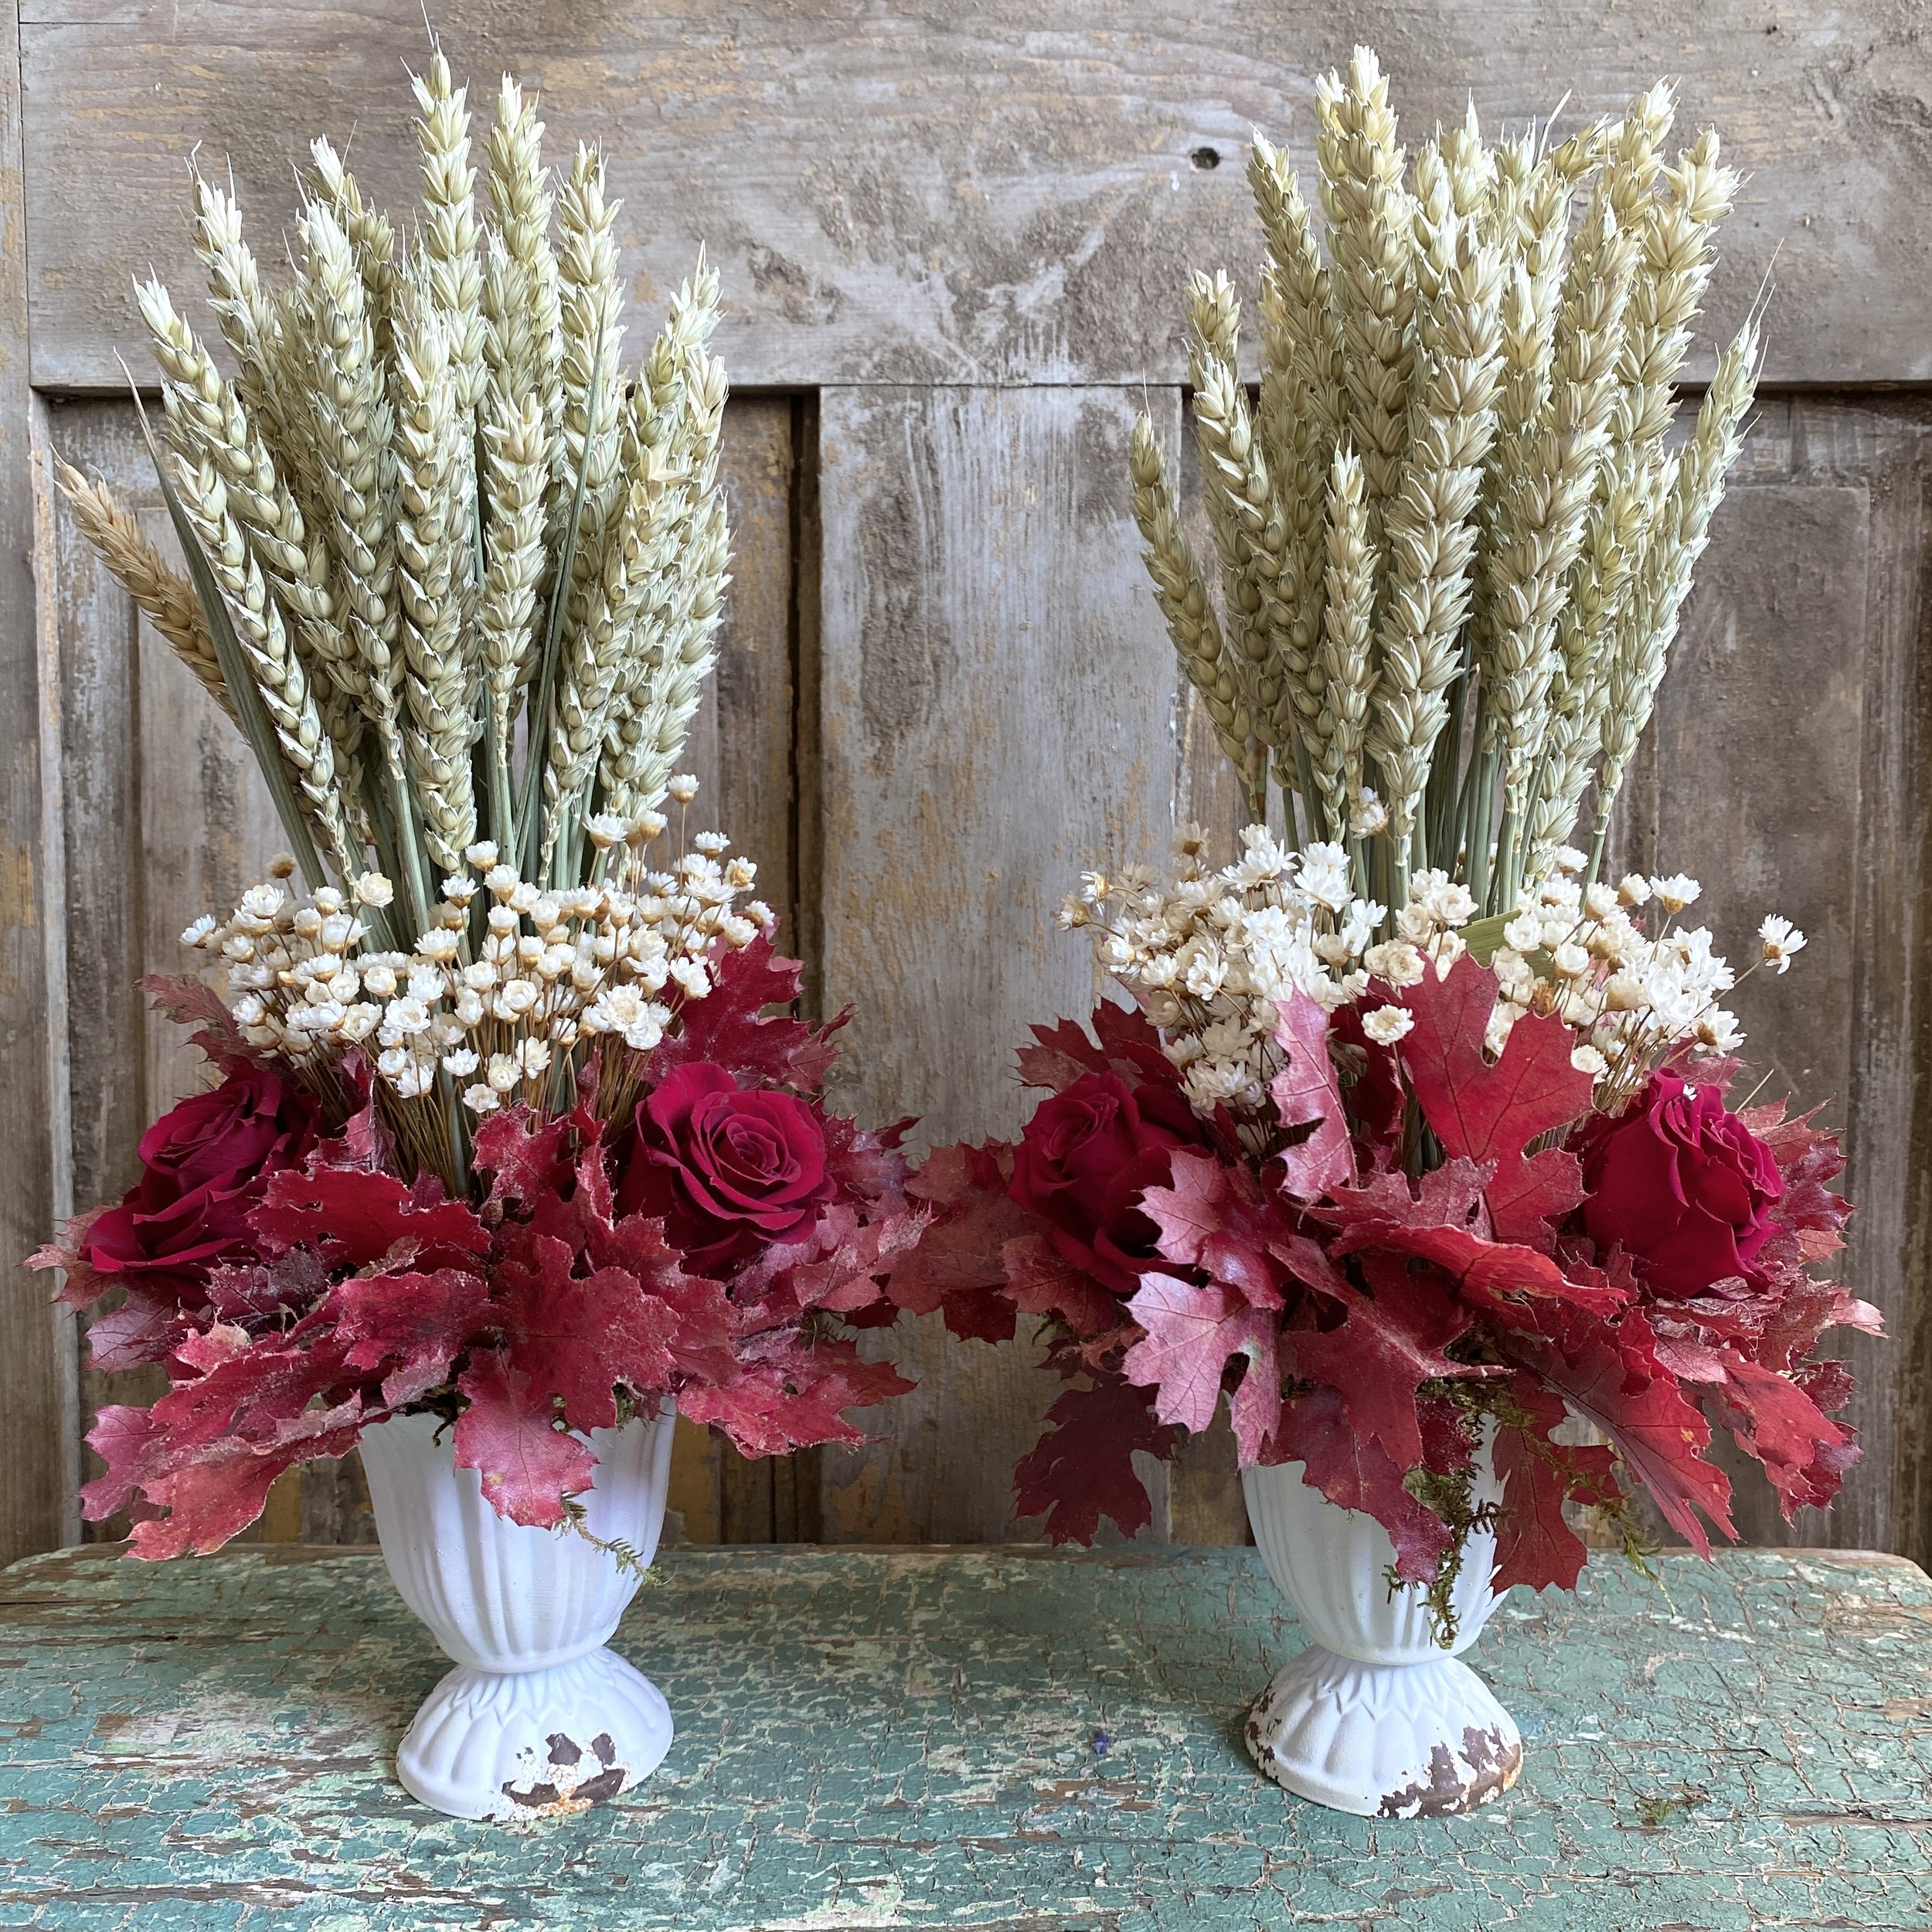 Autumn Dried Flower Arrangements with Oak, Roses, and Wheat